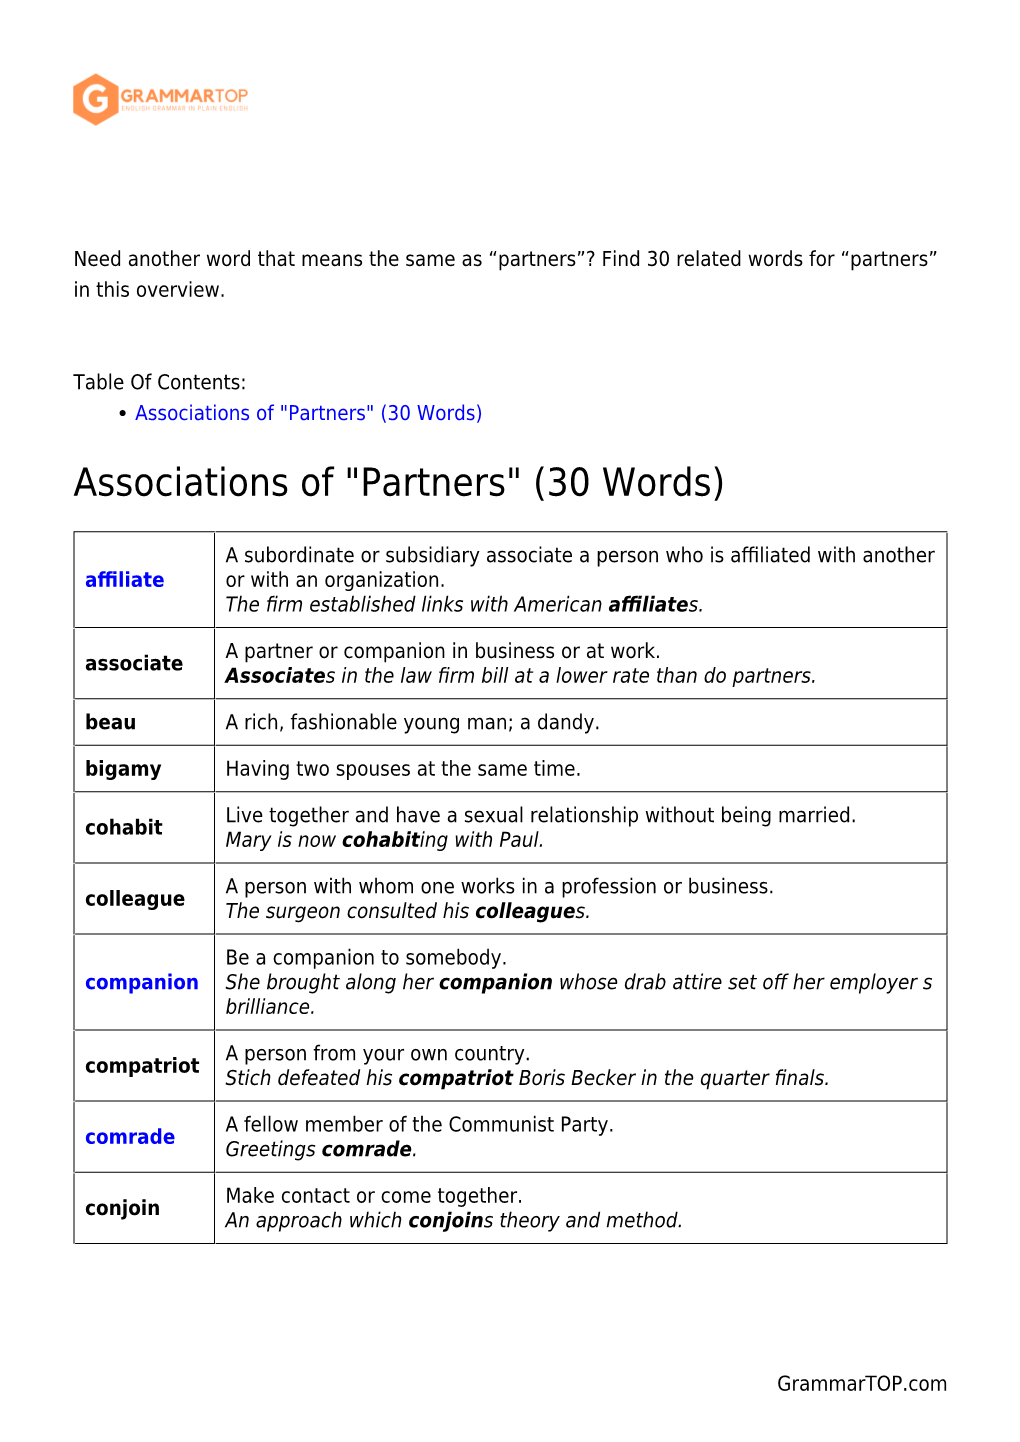 Partners”? Find 30 Related Words for “Partners” in This Overview